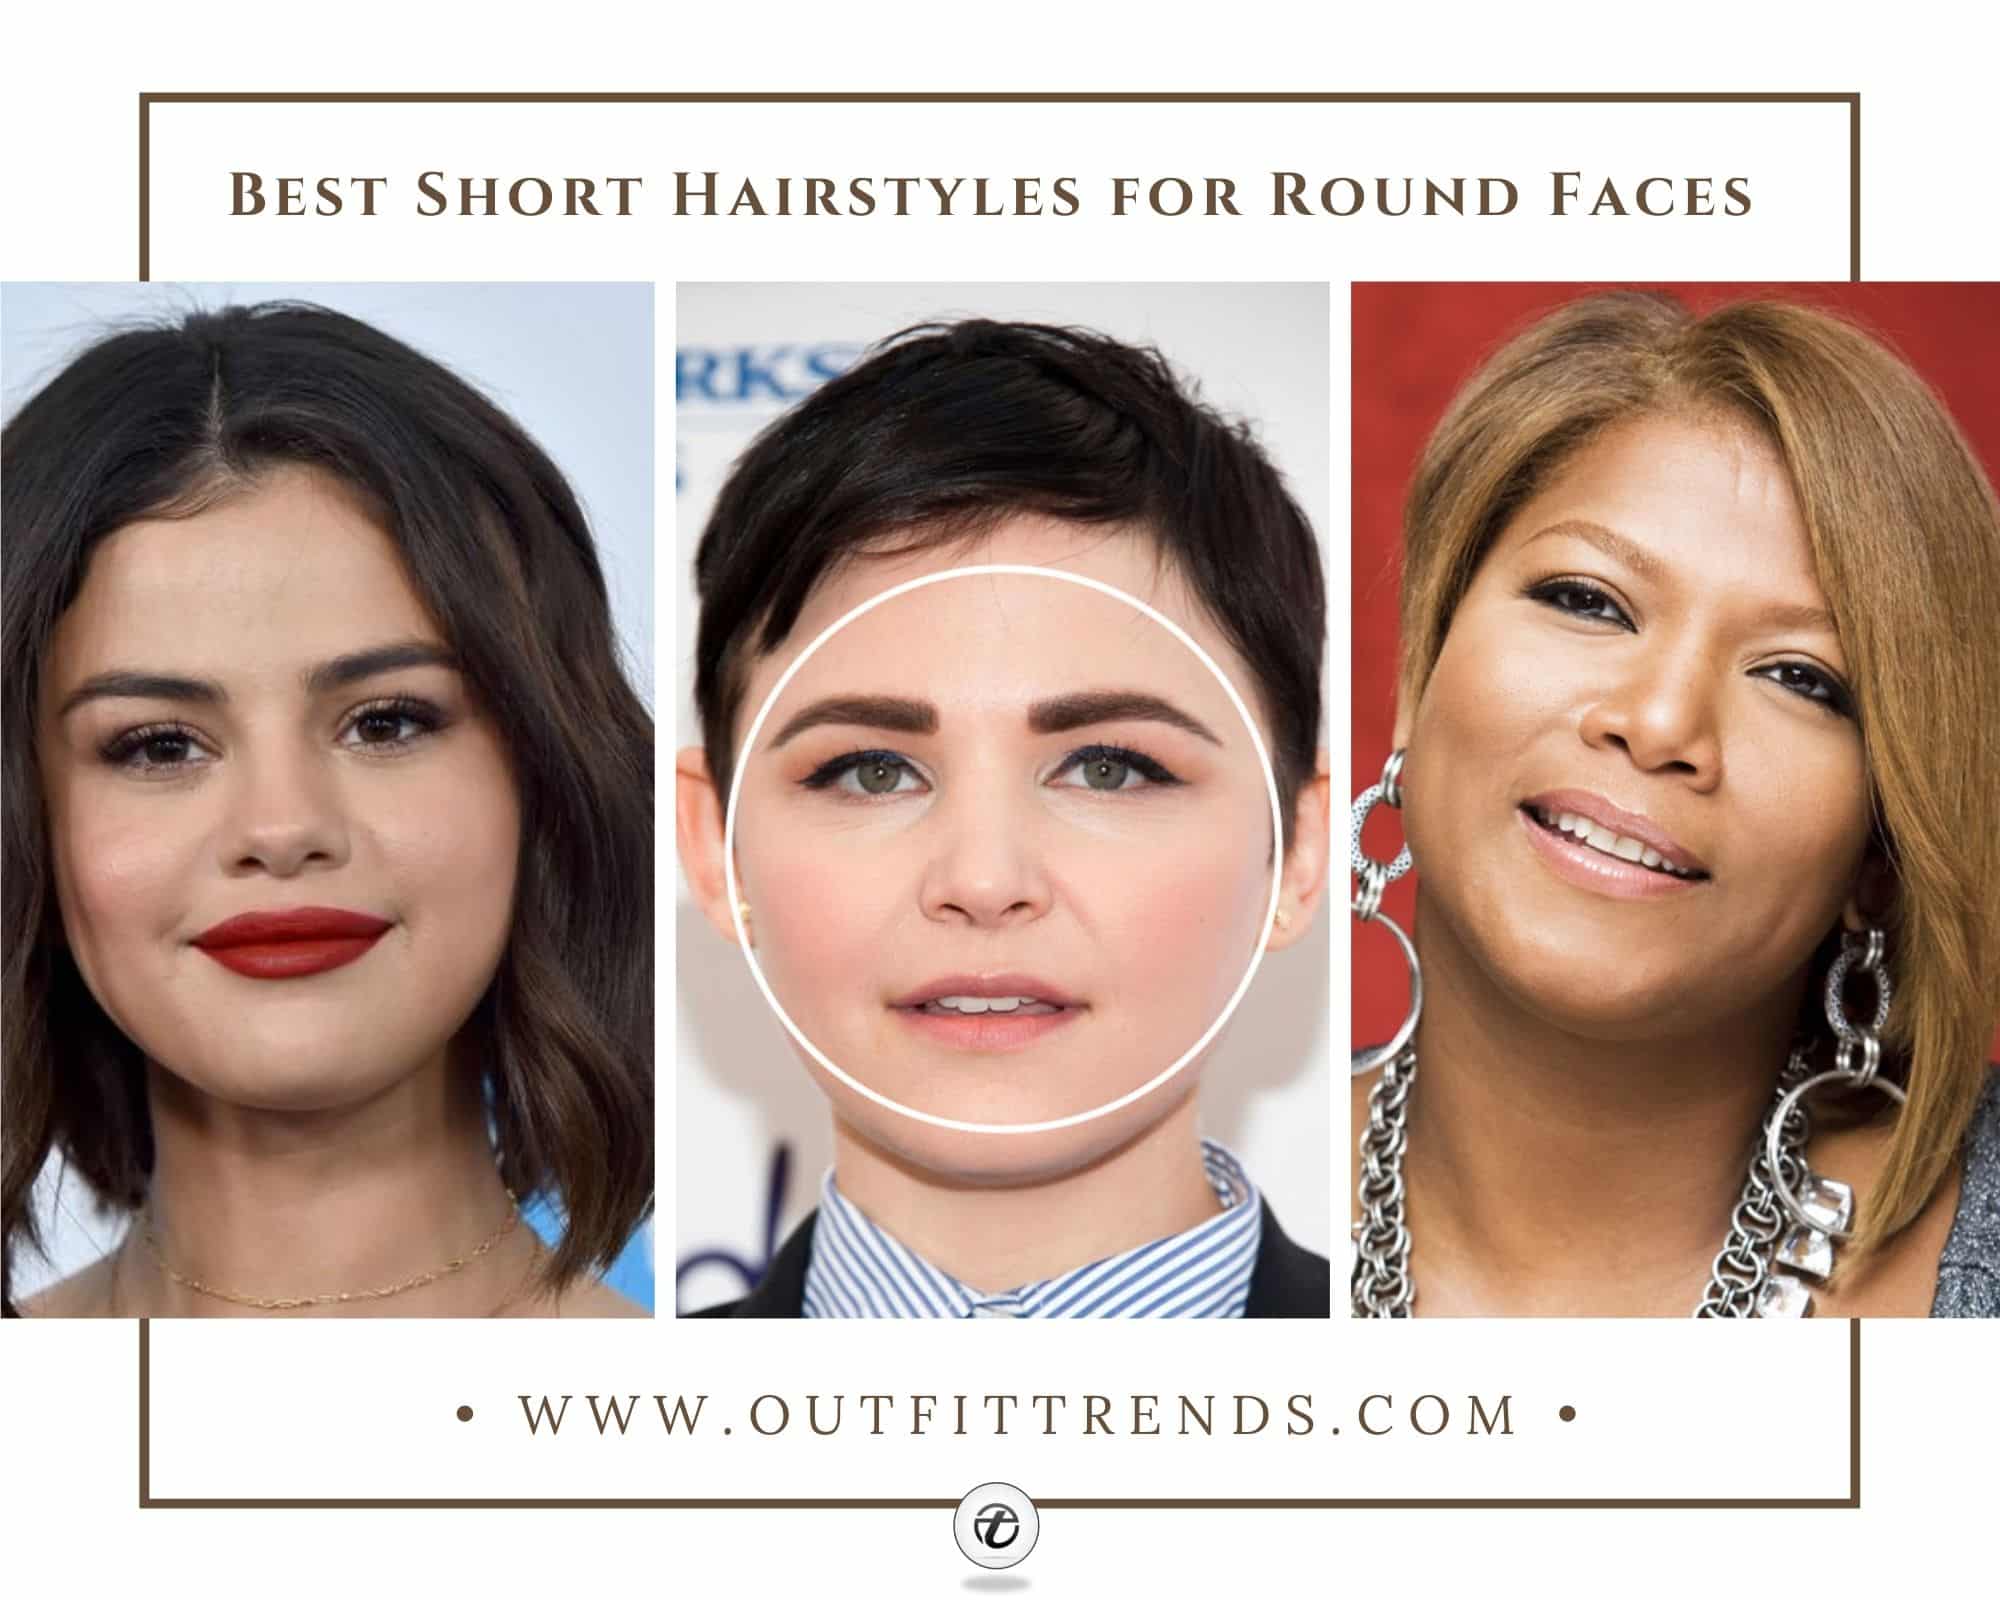 15 Haircuts and Hairstyles That Make Your Face Appear Slimmer | Hair.com By  L'Oréal